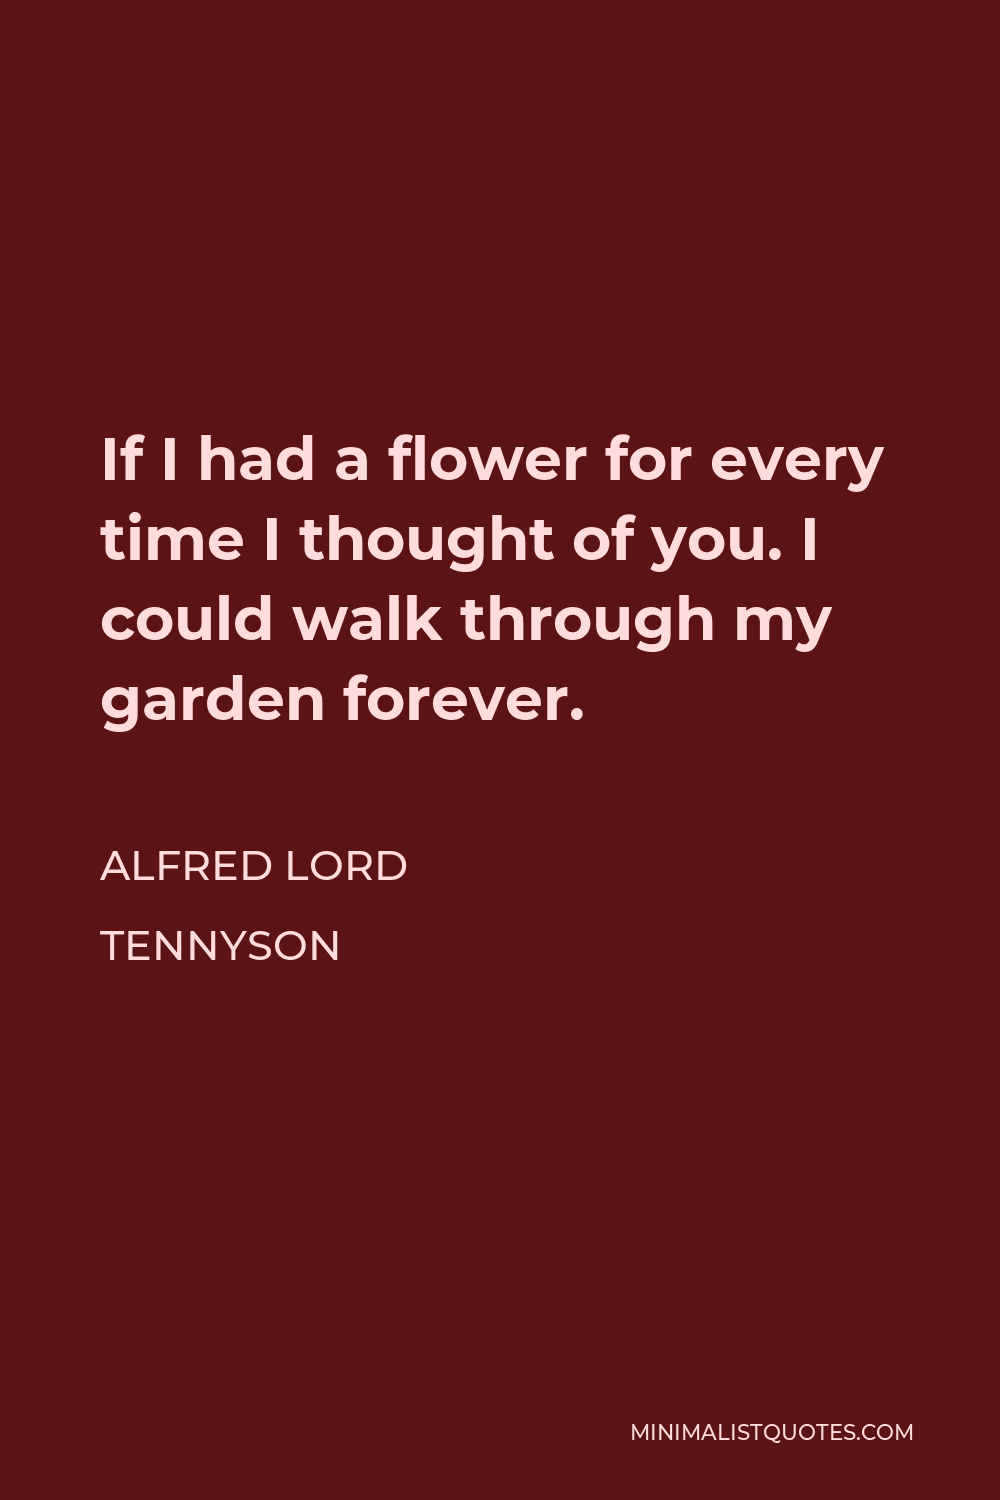 Alfred Lord Tennyson Quote: If I had a flower for every time I thought ...